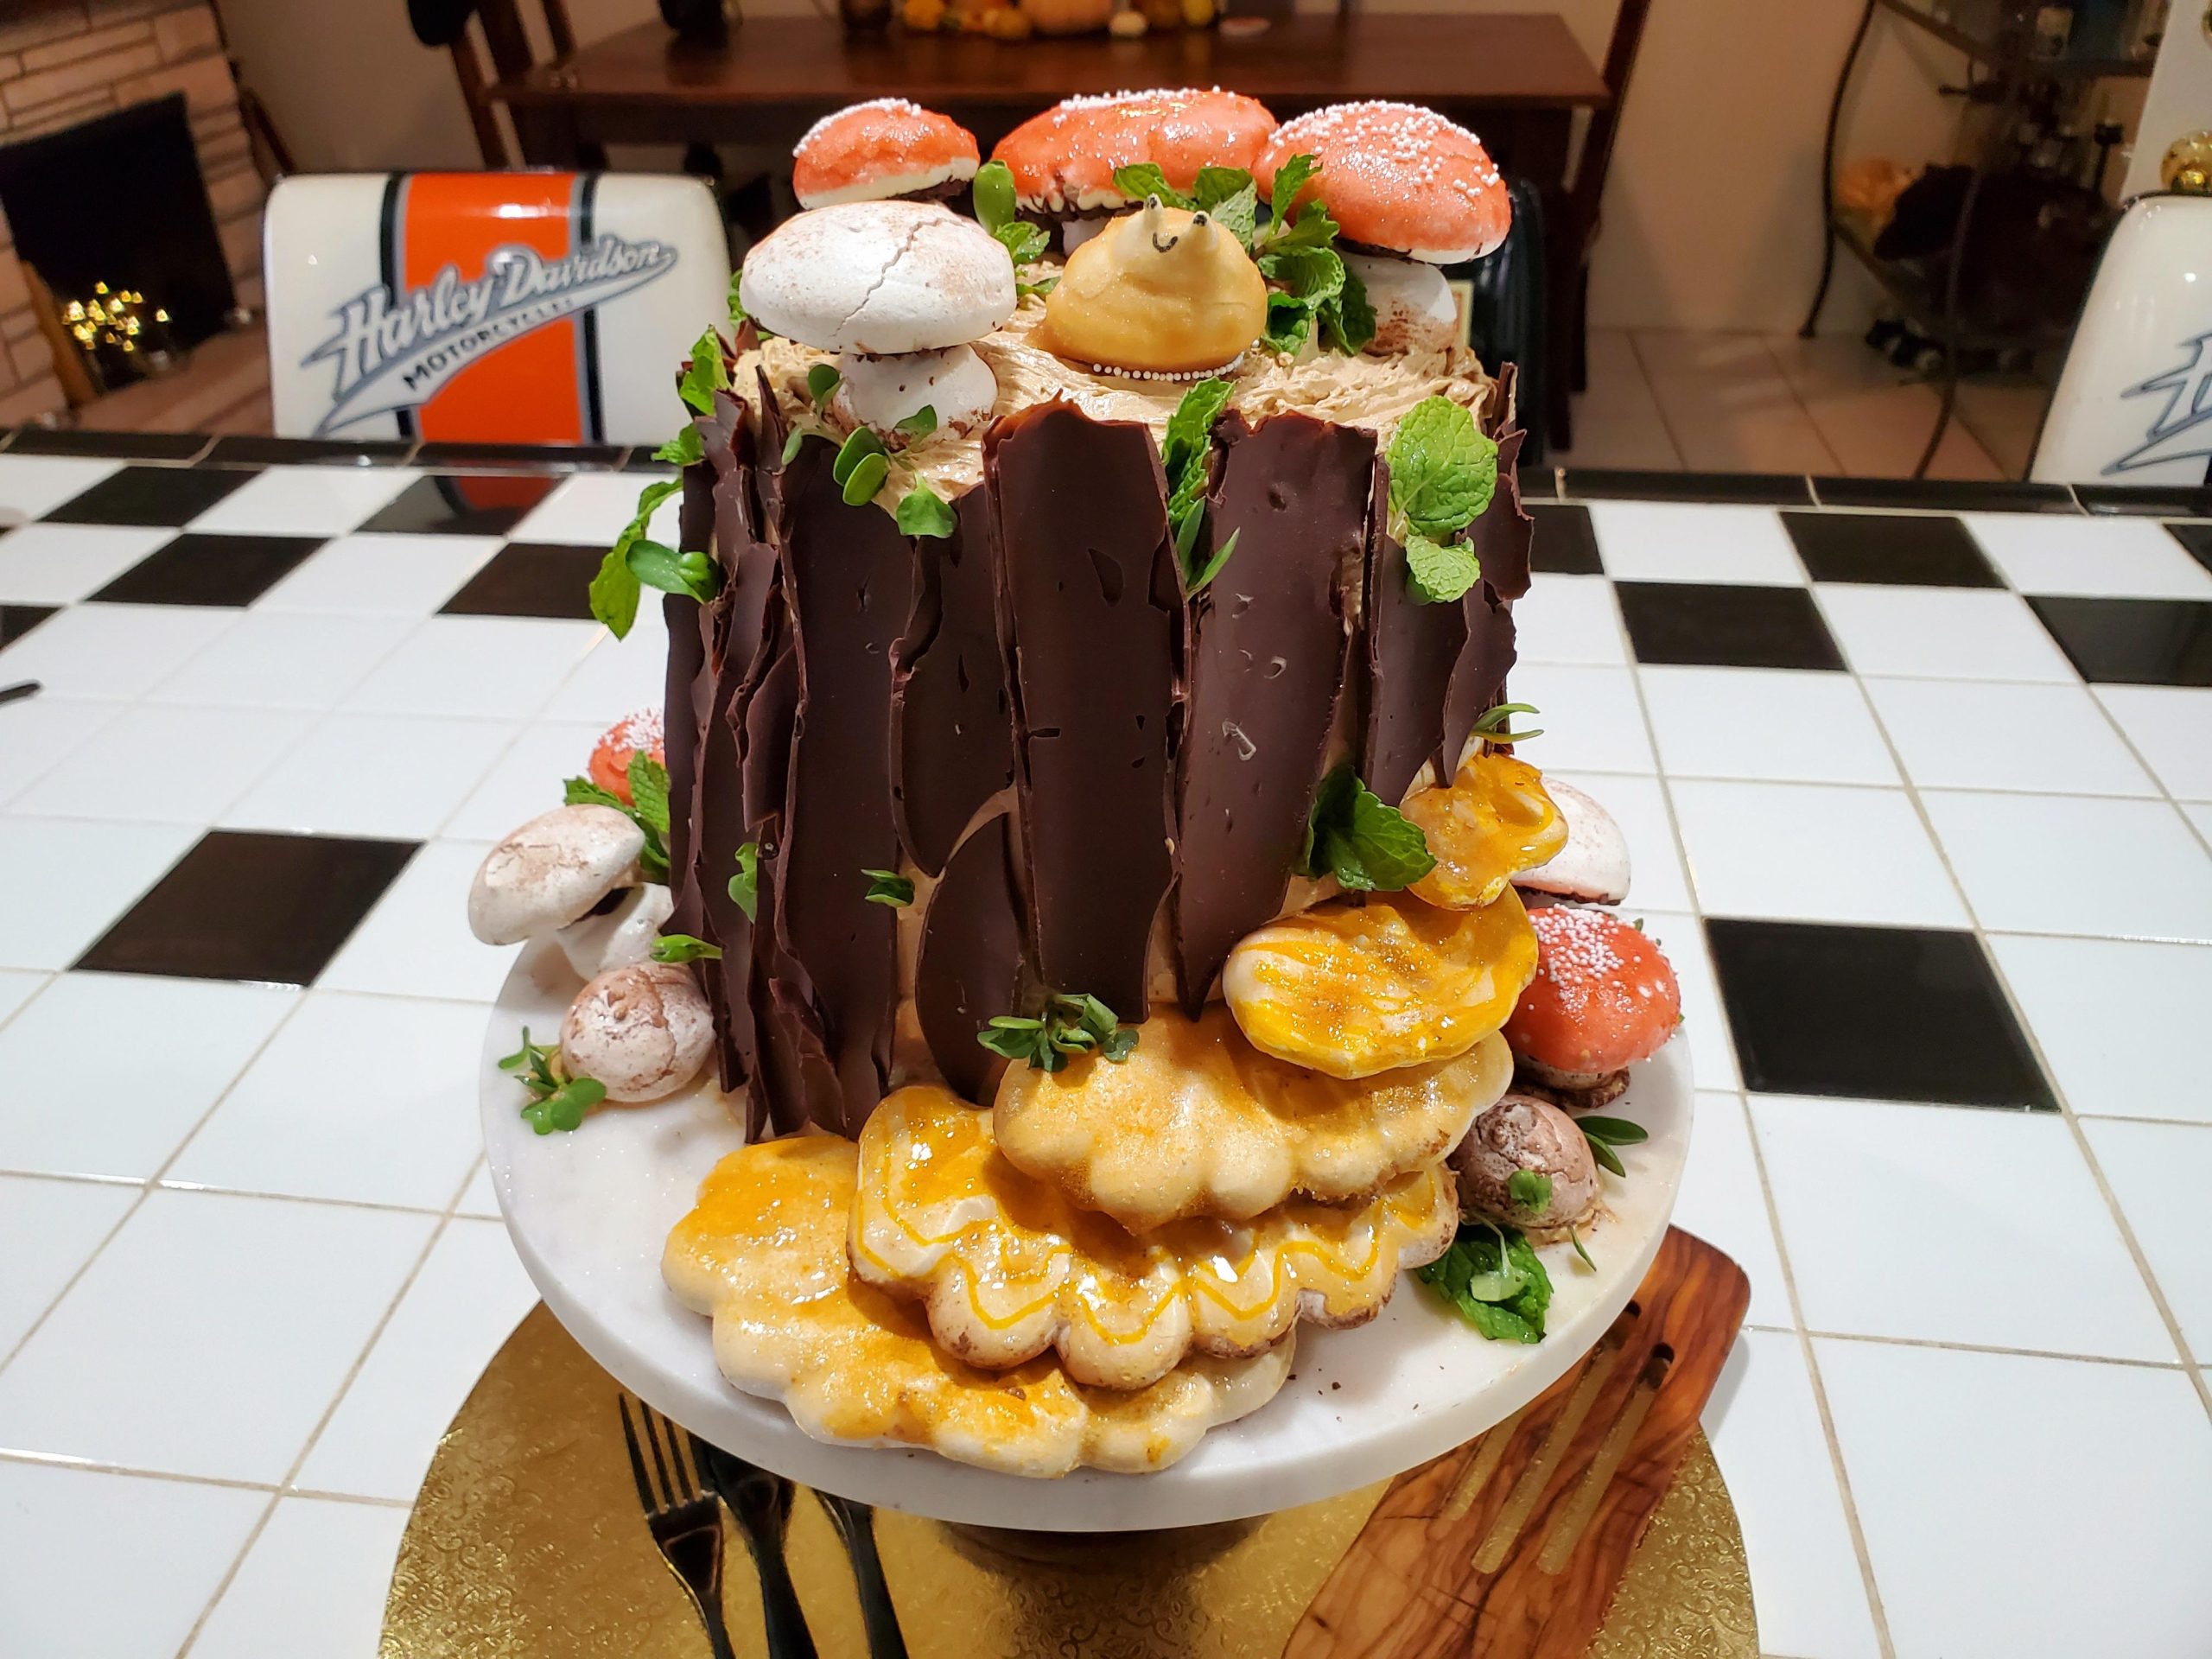 I made a mushroom covered tree stump cake for my daughter’s birthday!